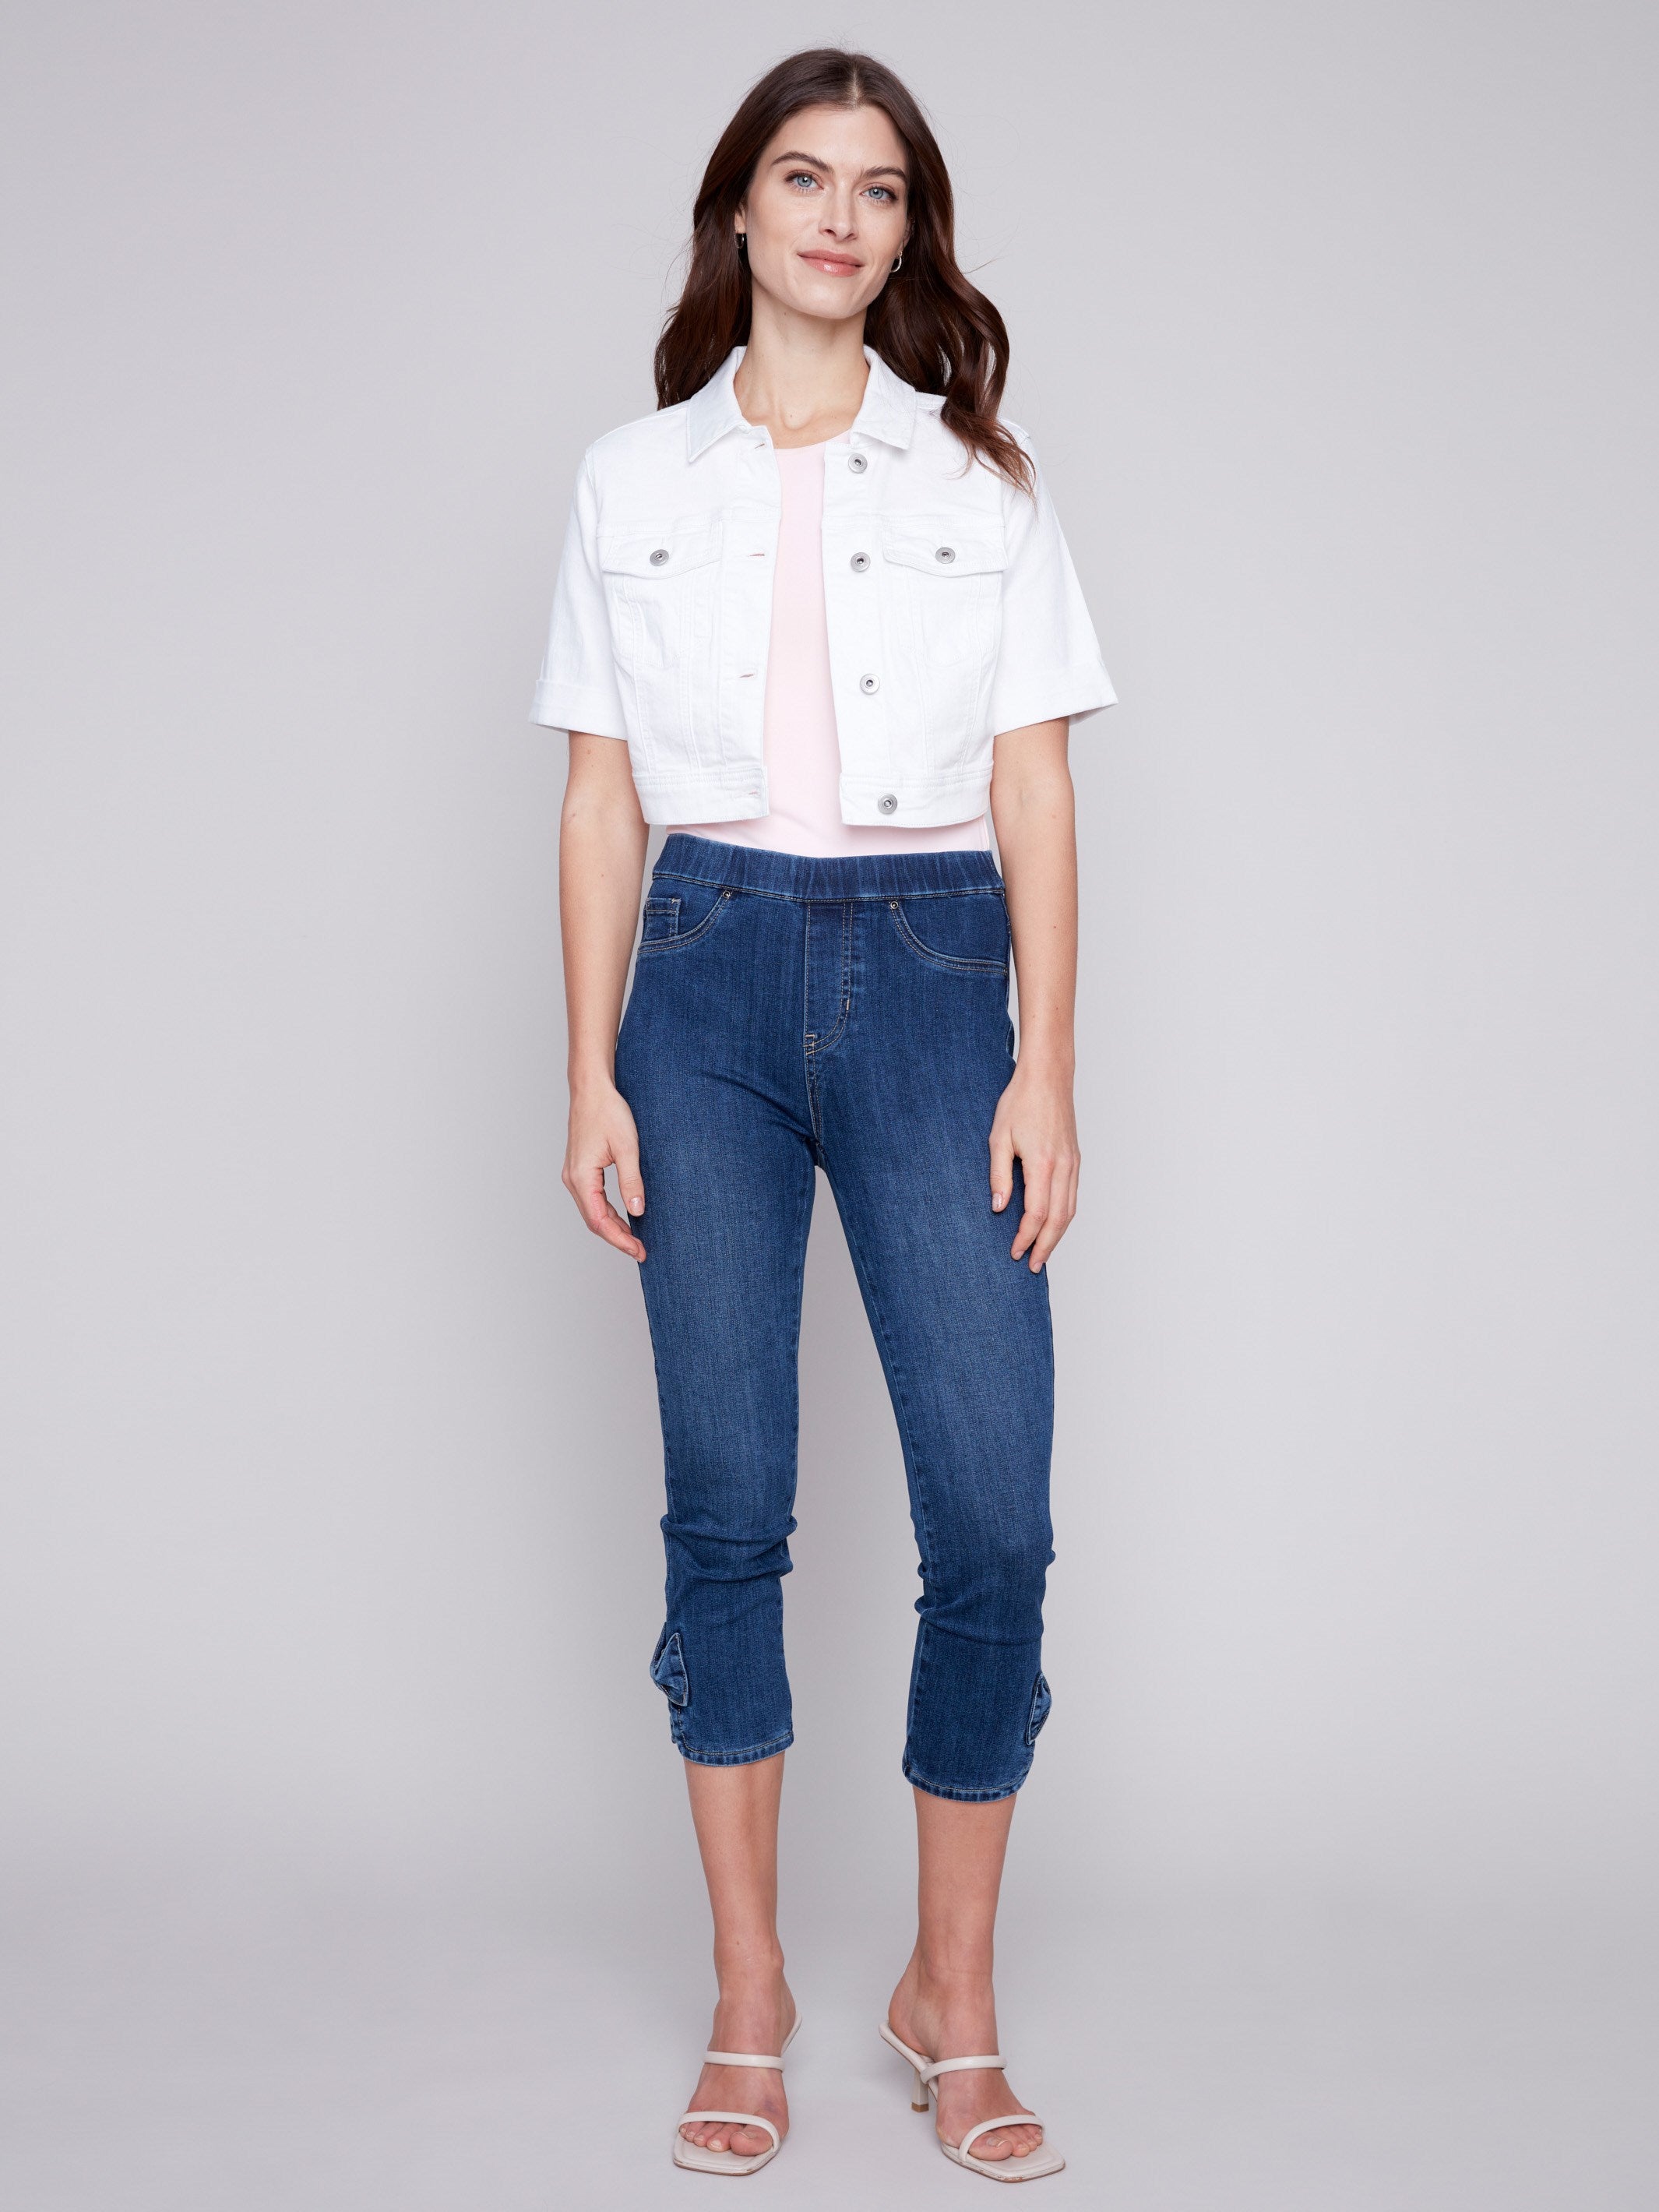 Charlie B Cropped Twill Jean Jacket - White - Image 2